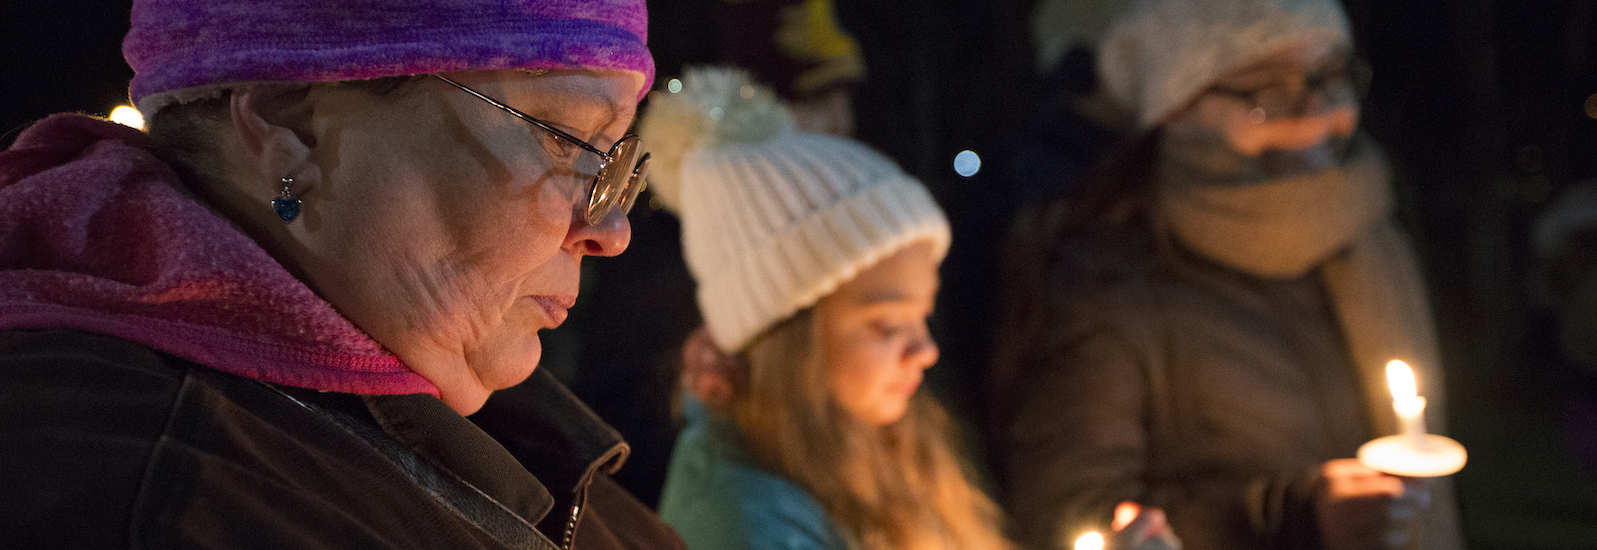 Renee Benner protects her candle from the wind at a homeless awareness event at Central Michigan University on Wednesday, Nov. 15, 2017.